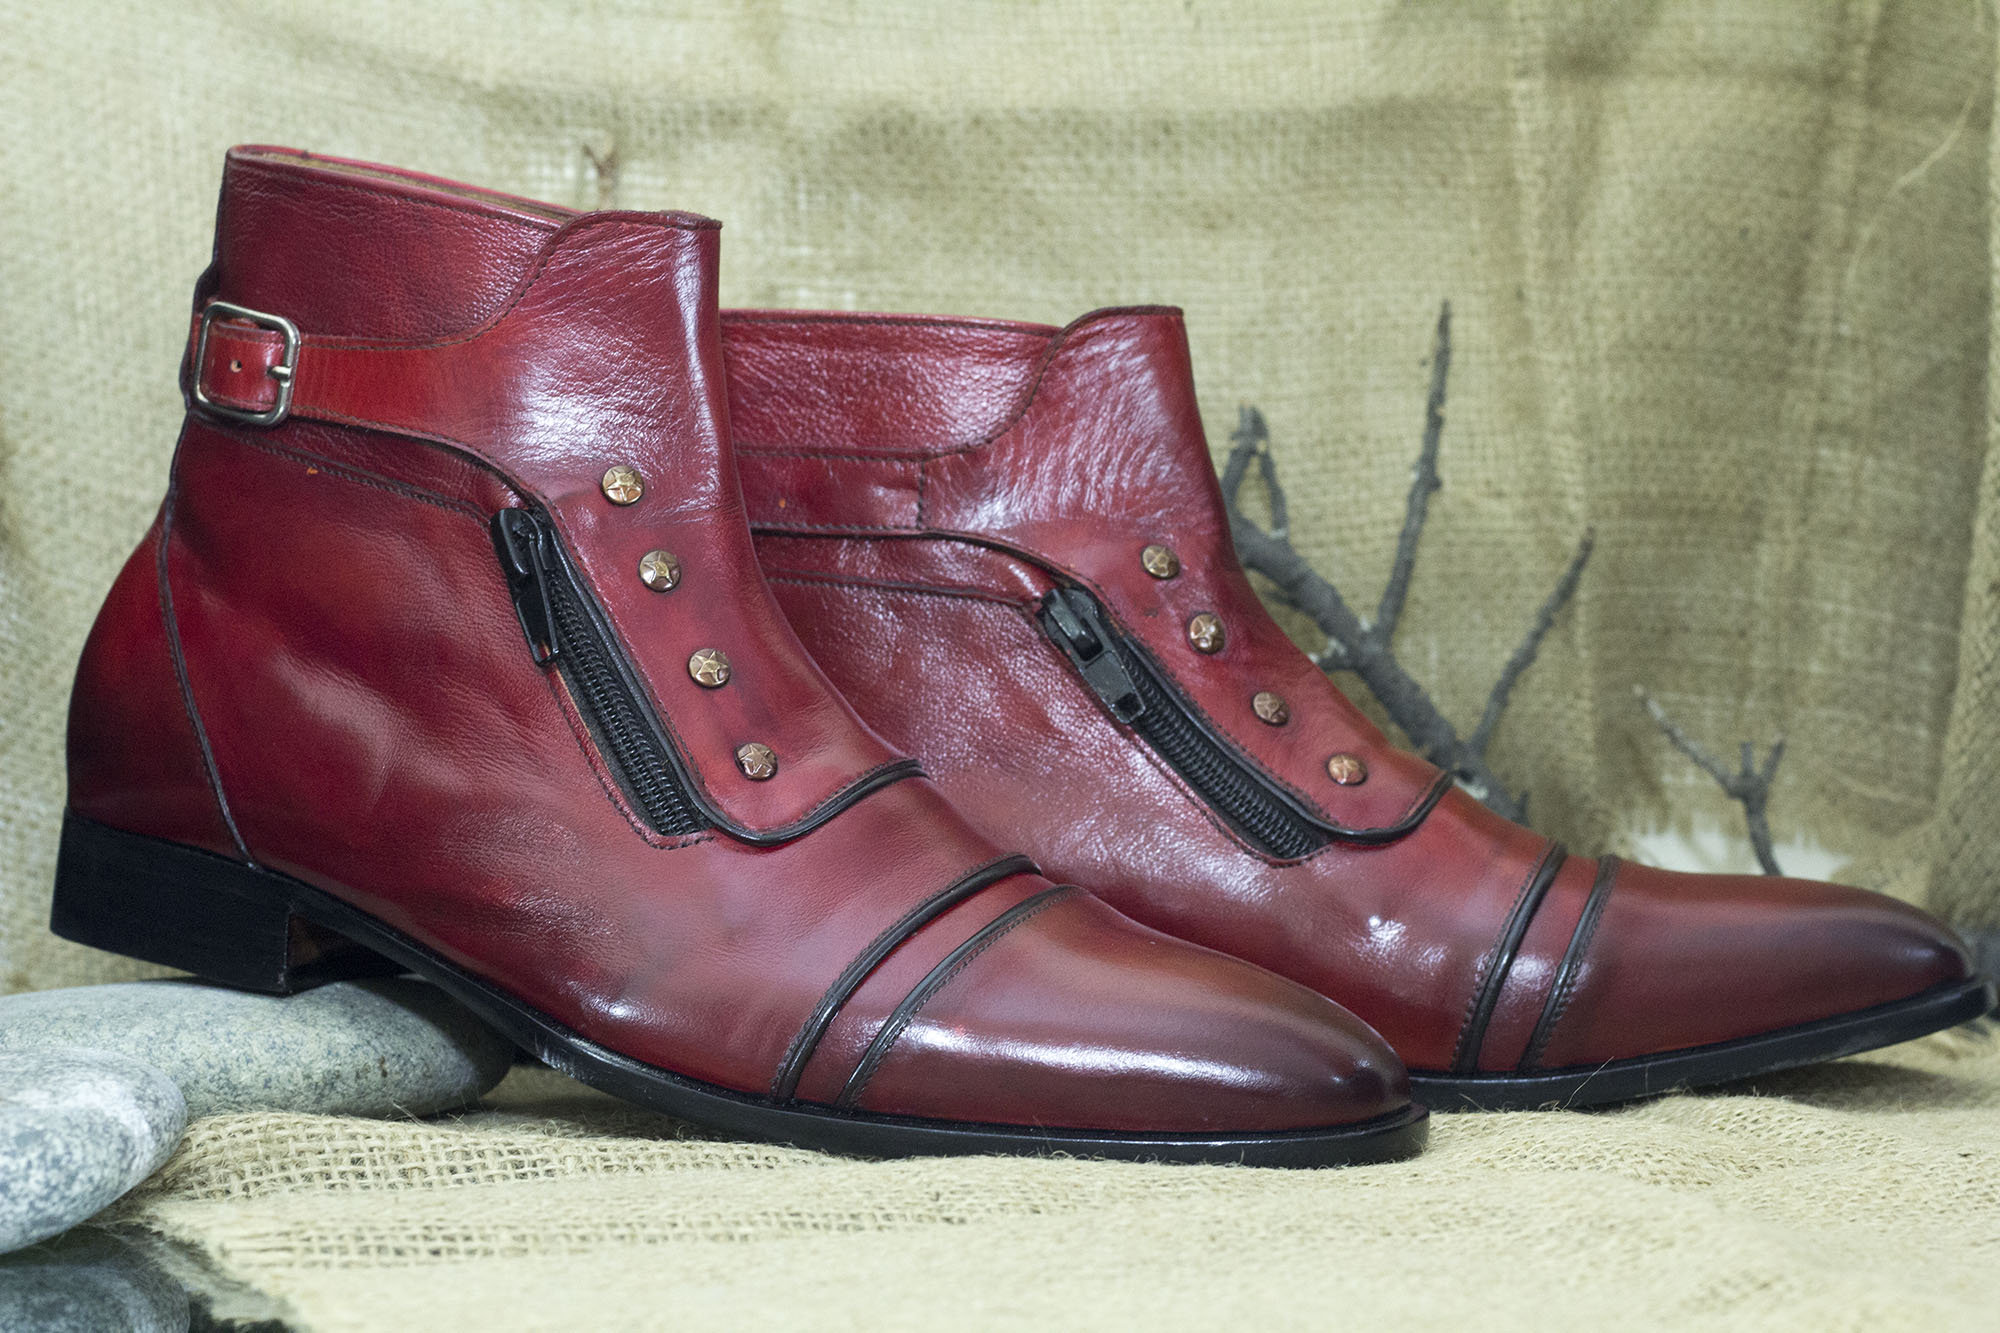 Handmade Side Zip Burgundy Cap Toe Style Leather Boot Ankle - Etsy